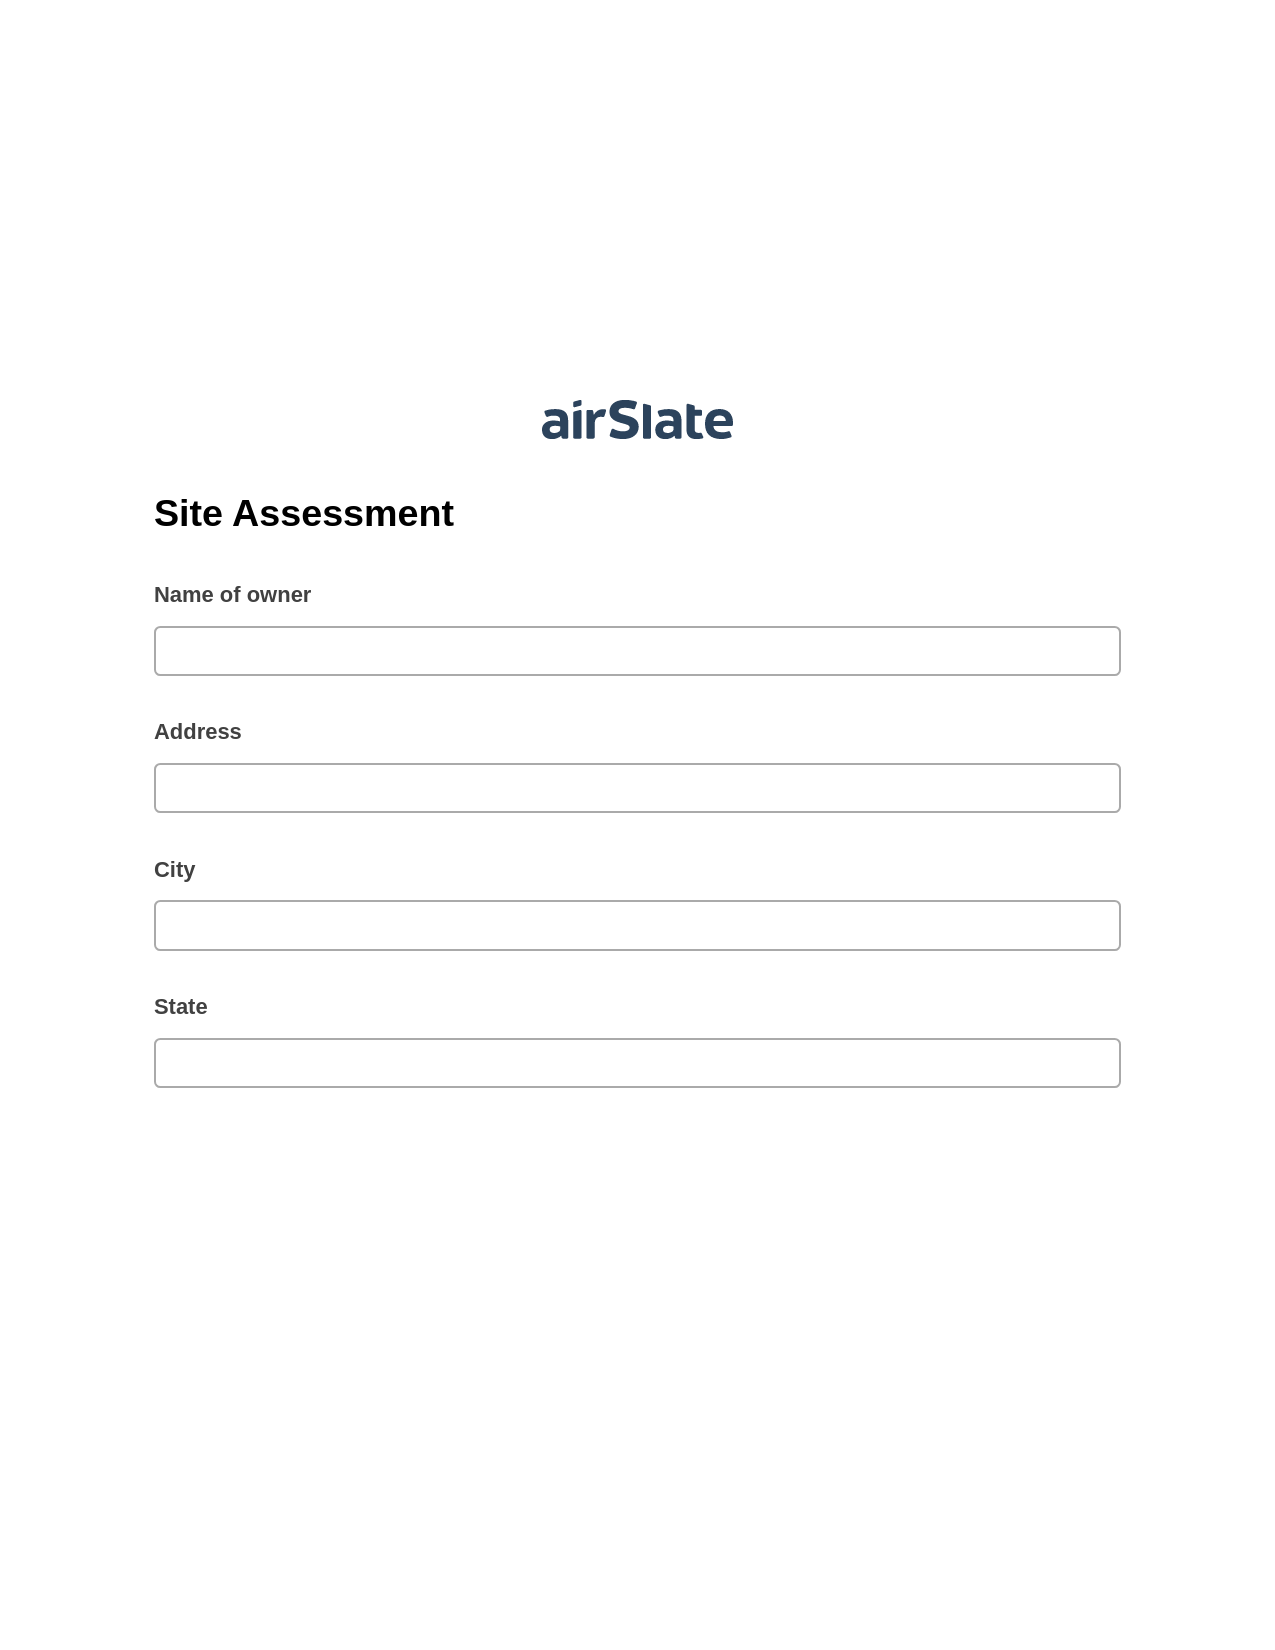 Site Assessment Pre-fill from CSV File Dropdown Options Bot, Document Hide Bot, OneDrive Bot